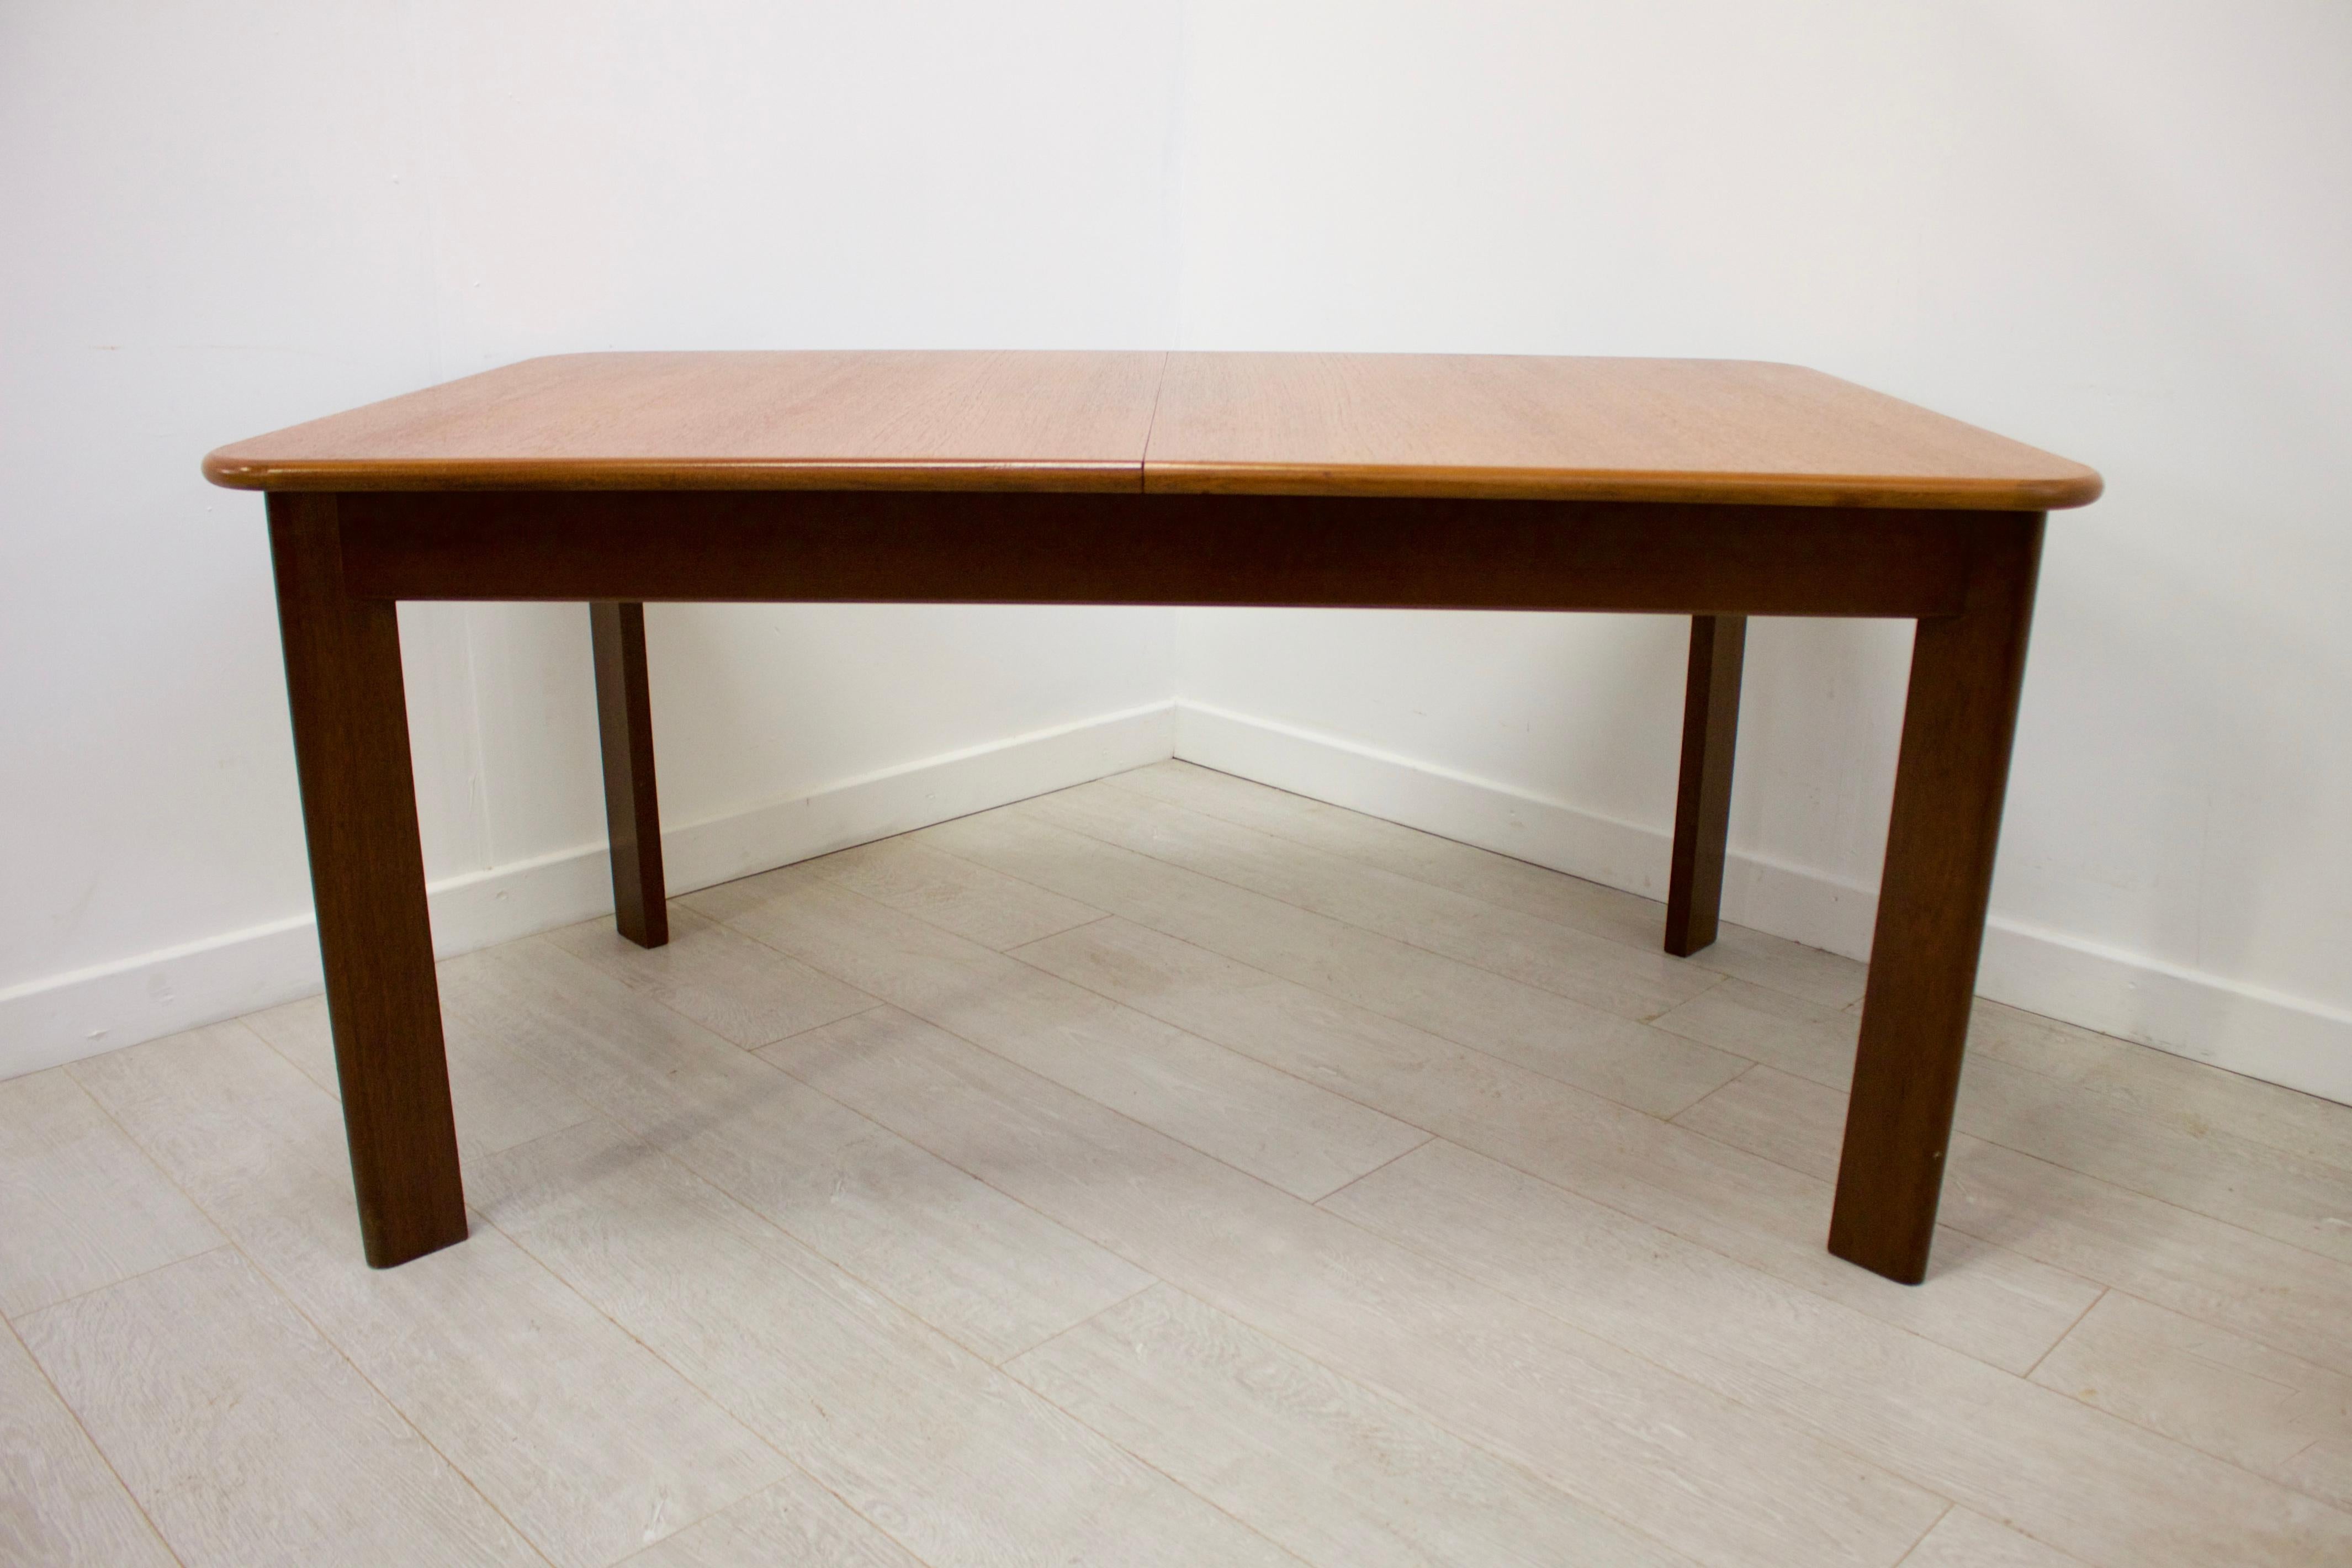 Midcentury Teak Extending Dining Table by G-Plan, 1970s For Sale 2